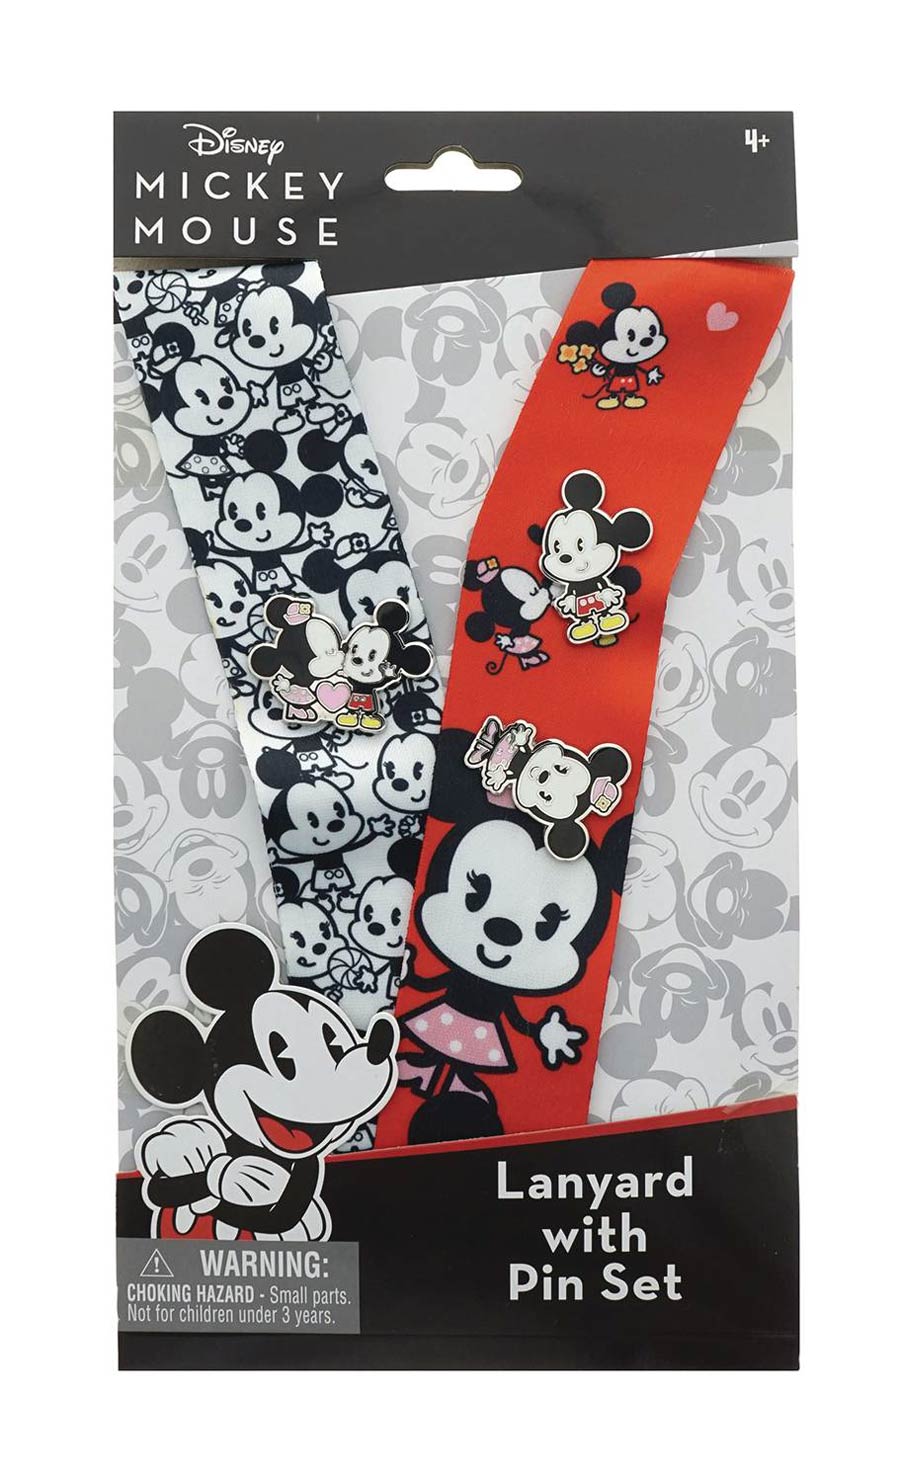 Mickey Deluxe Con Exclusive Lanyard With Enamel Pin Set